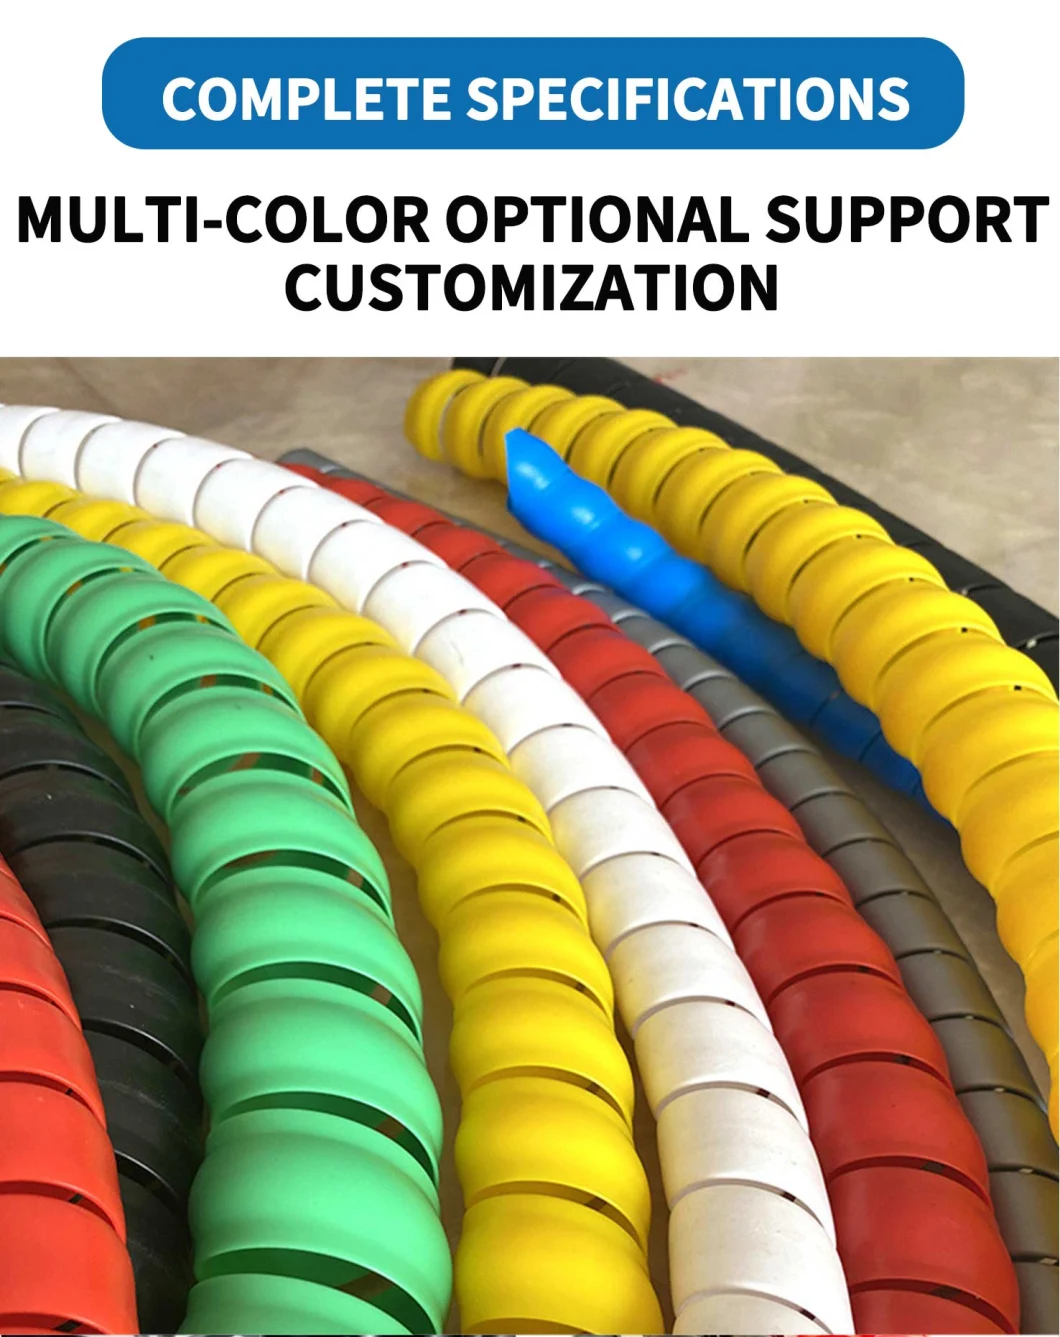 Wholesale Plastic Spiral Wrap Protection Spring Hose Guard